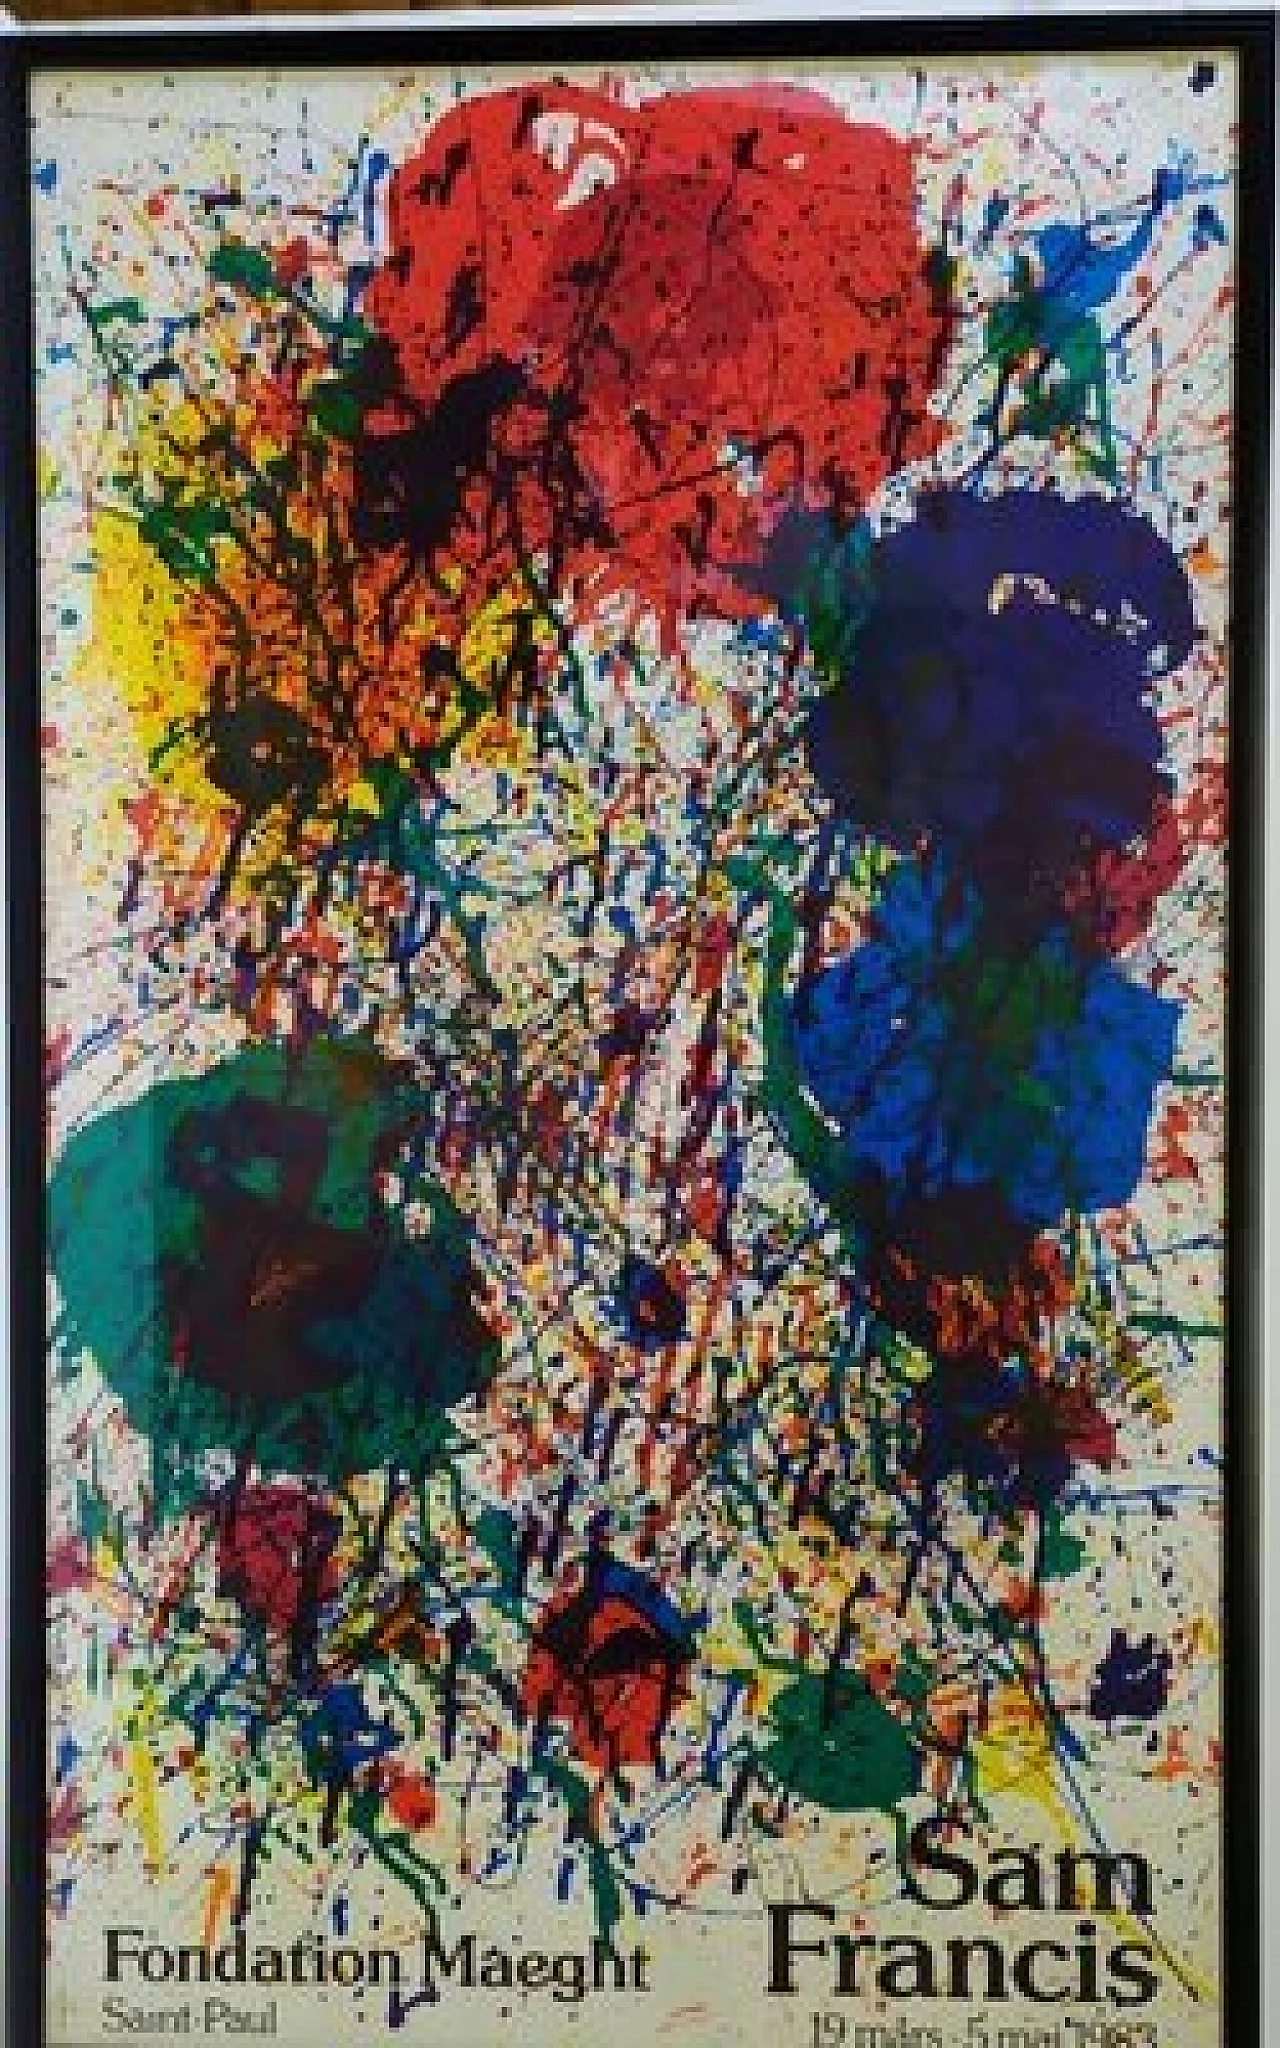 Sam Francis, abstract composition, lithography, 1983 1